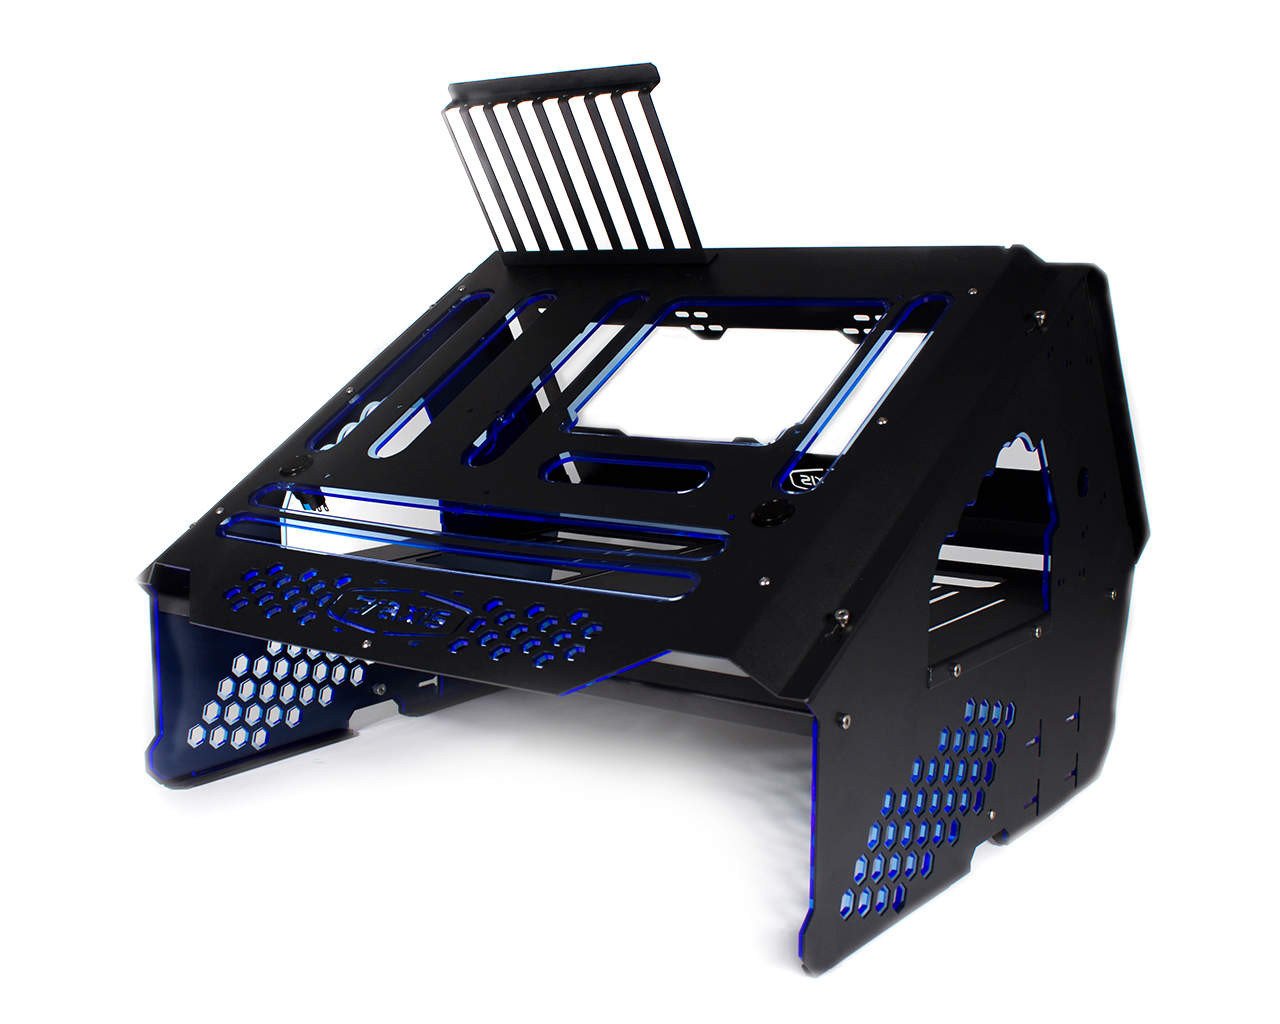 PrimoChill's Praxis Wetbench Powdercoated Steel Modular Open Air Computer Test Bench for Watercooling or Air Cooled Components - PrimoChill - KEEPING IT COOL Black w/UV Blue Accents